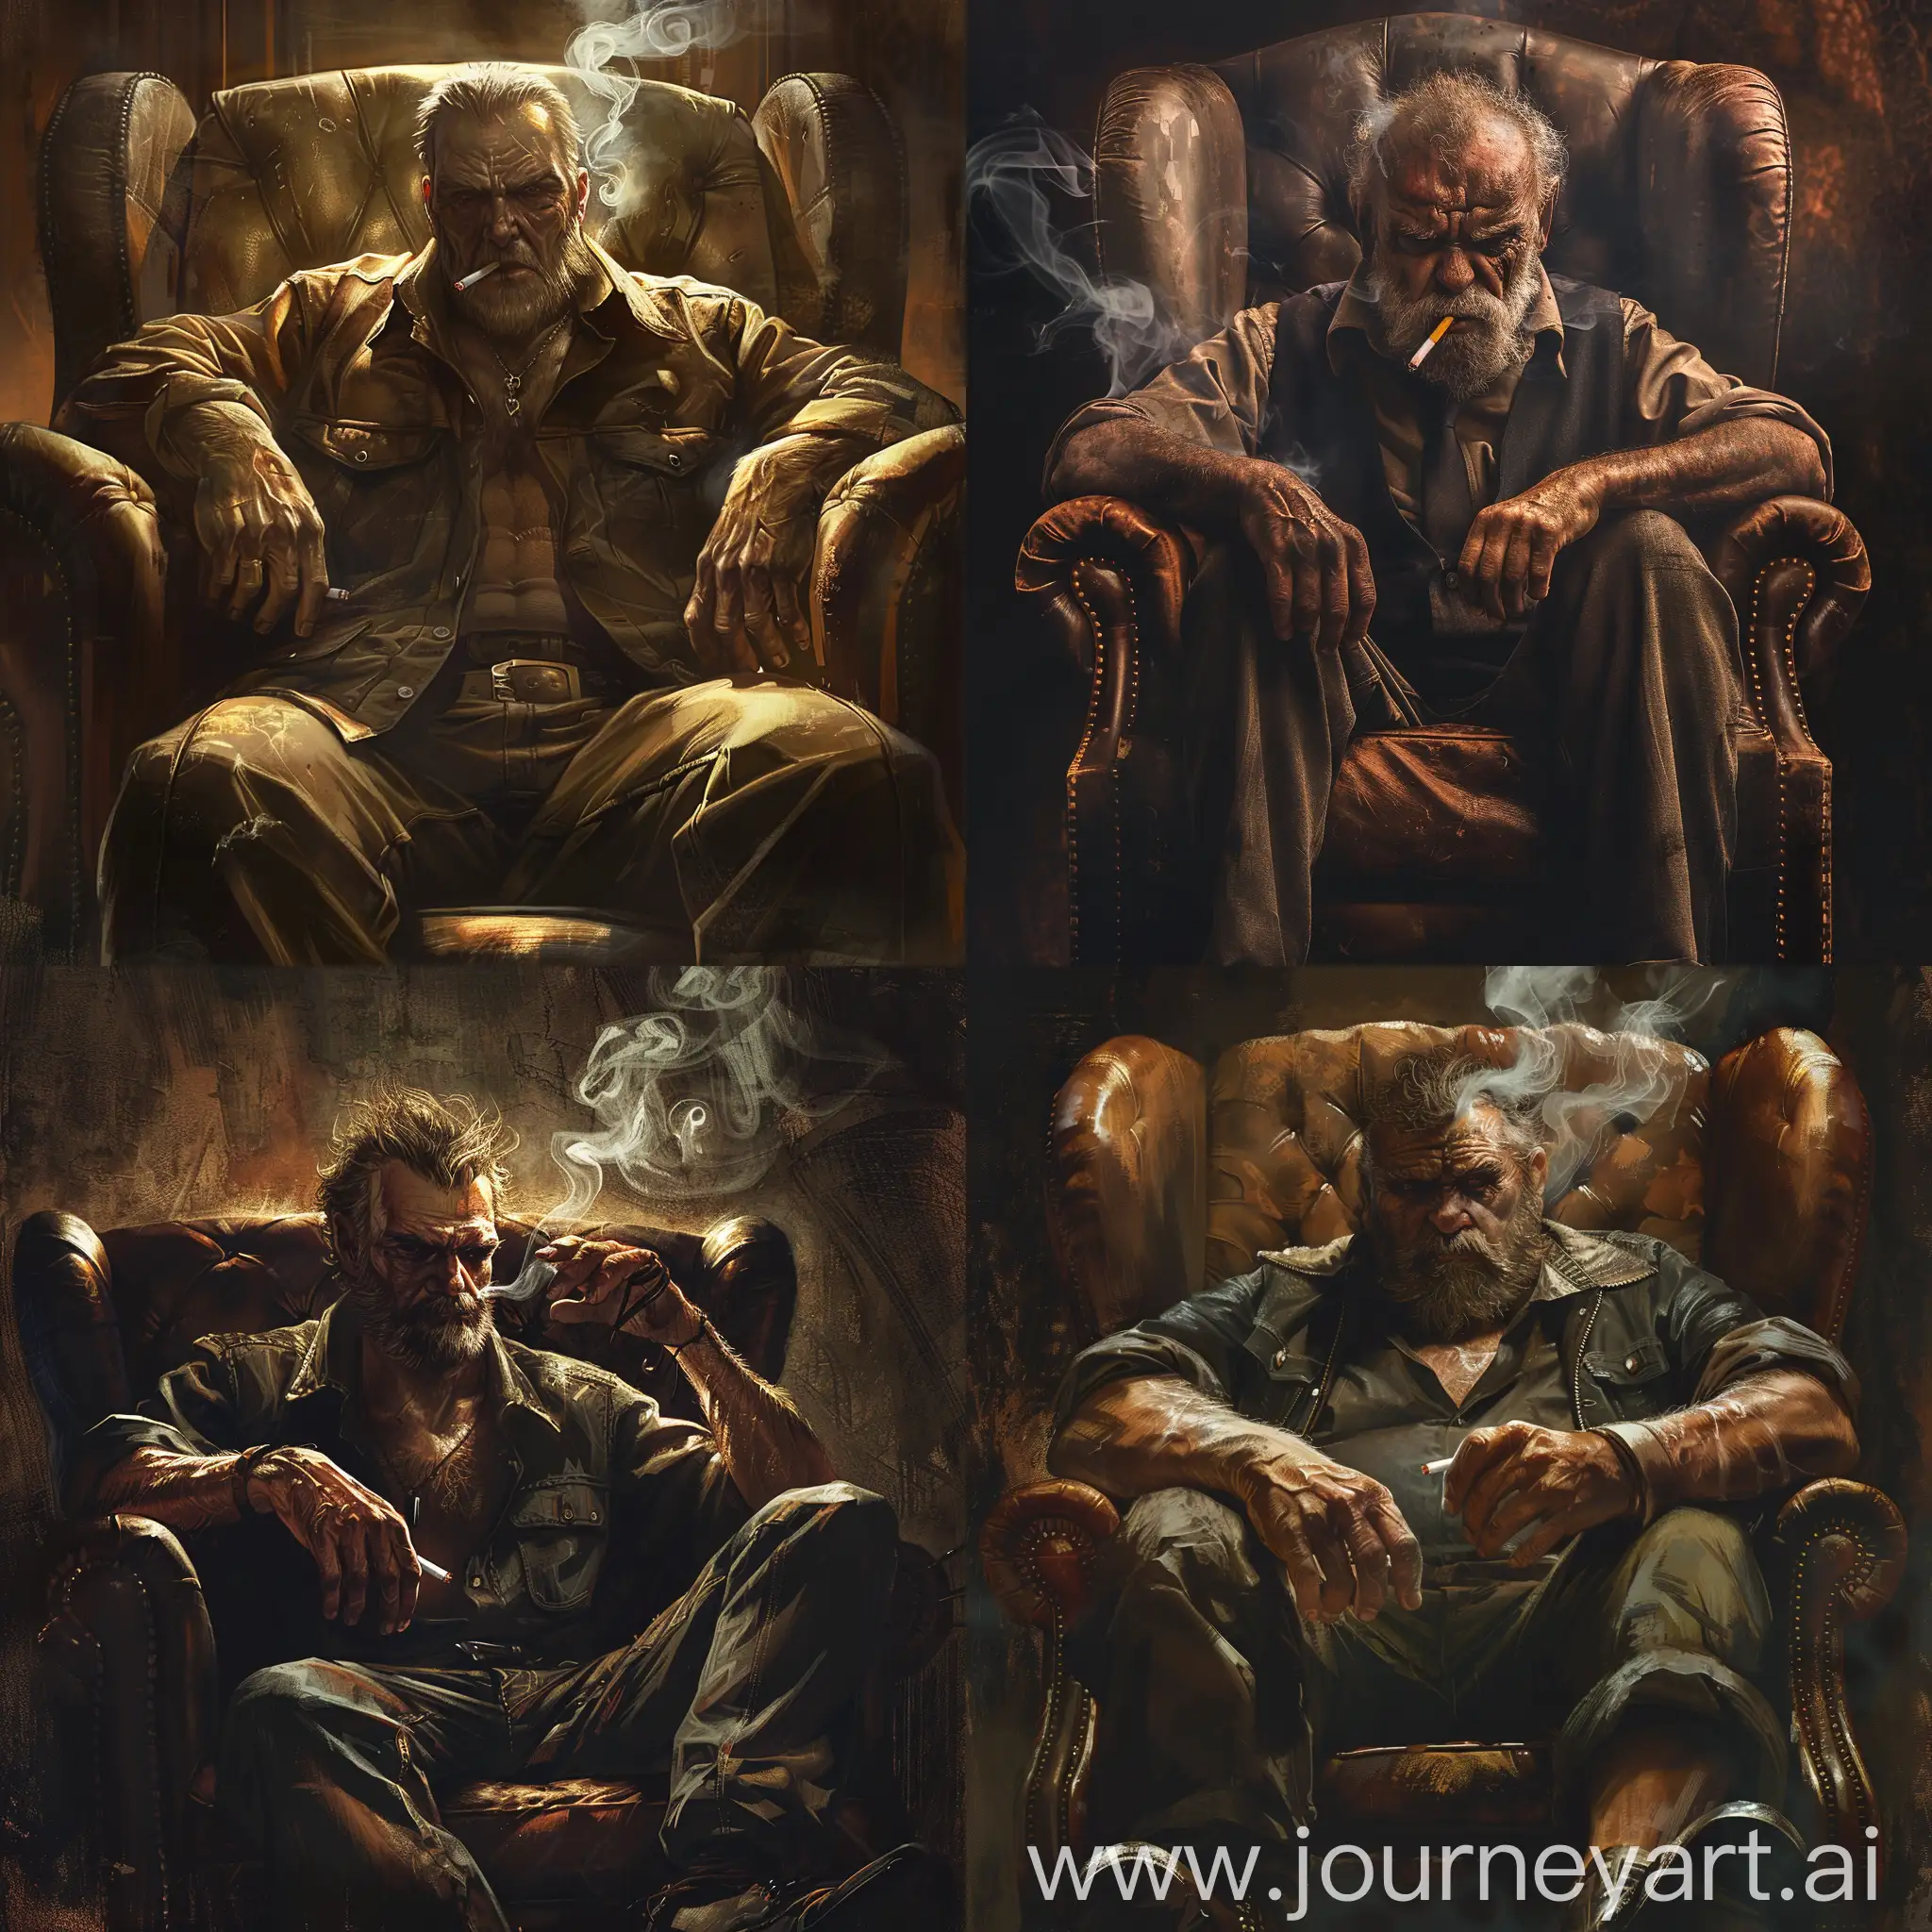 a gruff man smoking a cigarette sitting in a leather chair